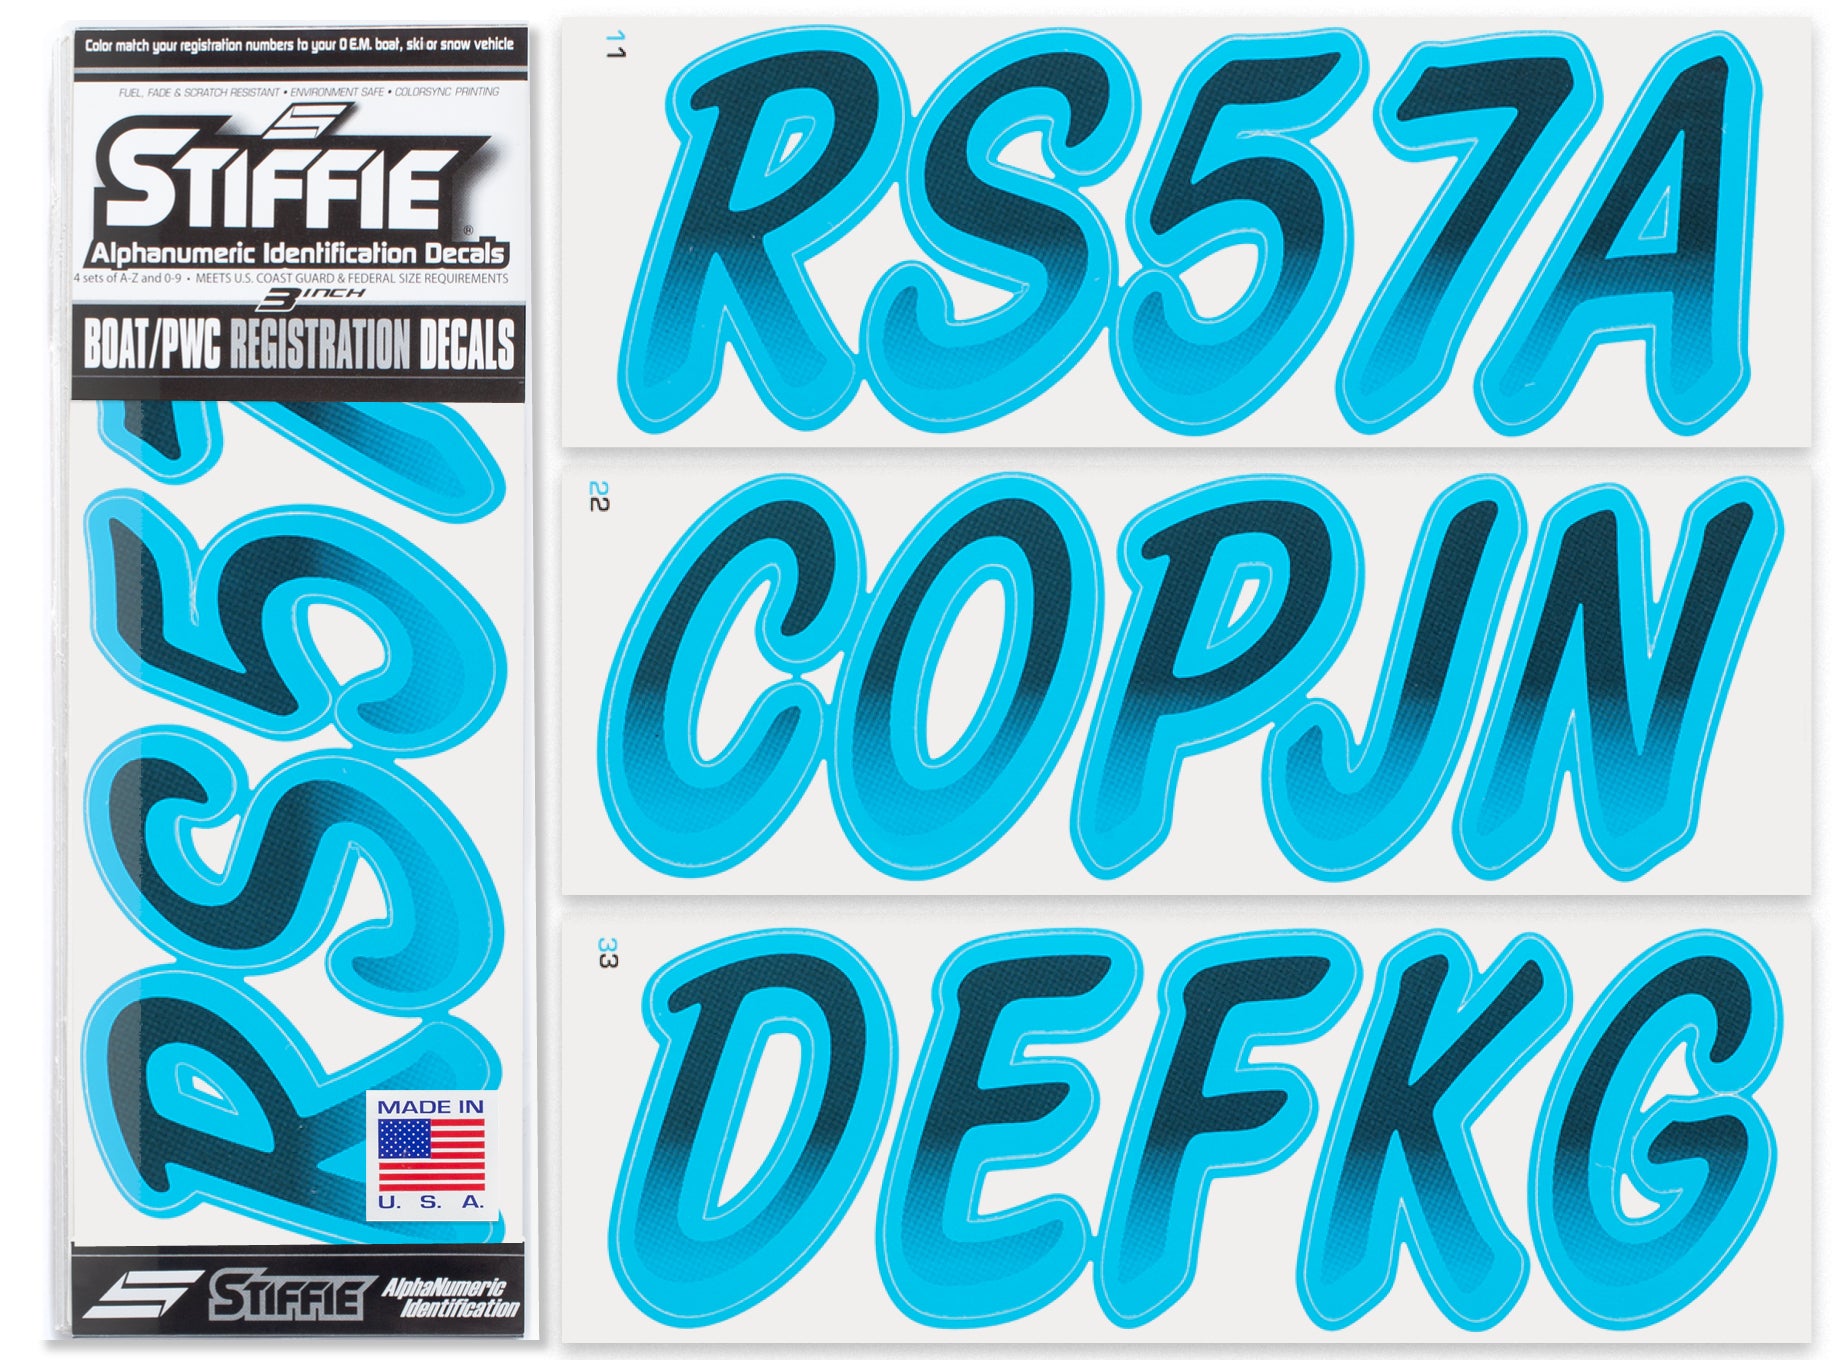 STIFFIE Whipline Black/Sky Blue 3" Alpha-Numeric Registration Identification Numbers Stickers Decals for Boats & Personal Watercraft: Matches Sea-Doo 2016+ GTX LTD 300, 215, is 260, 230